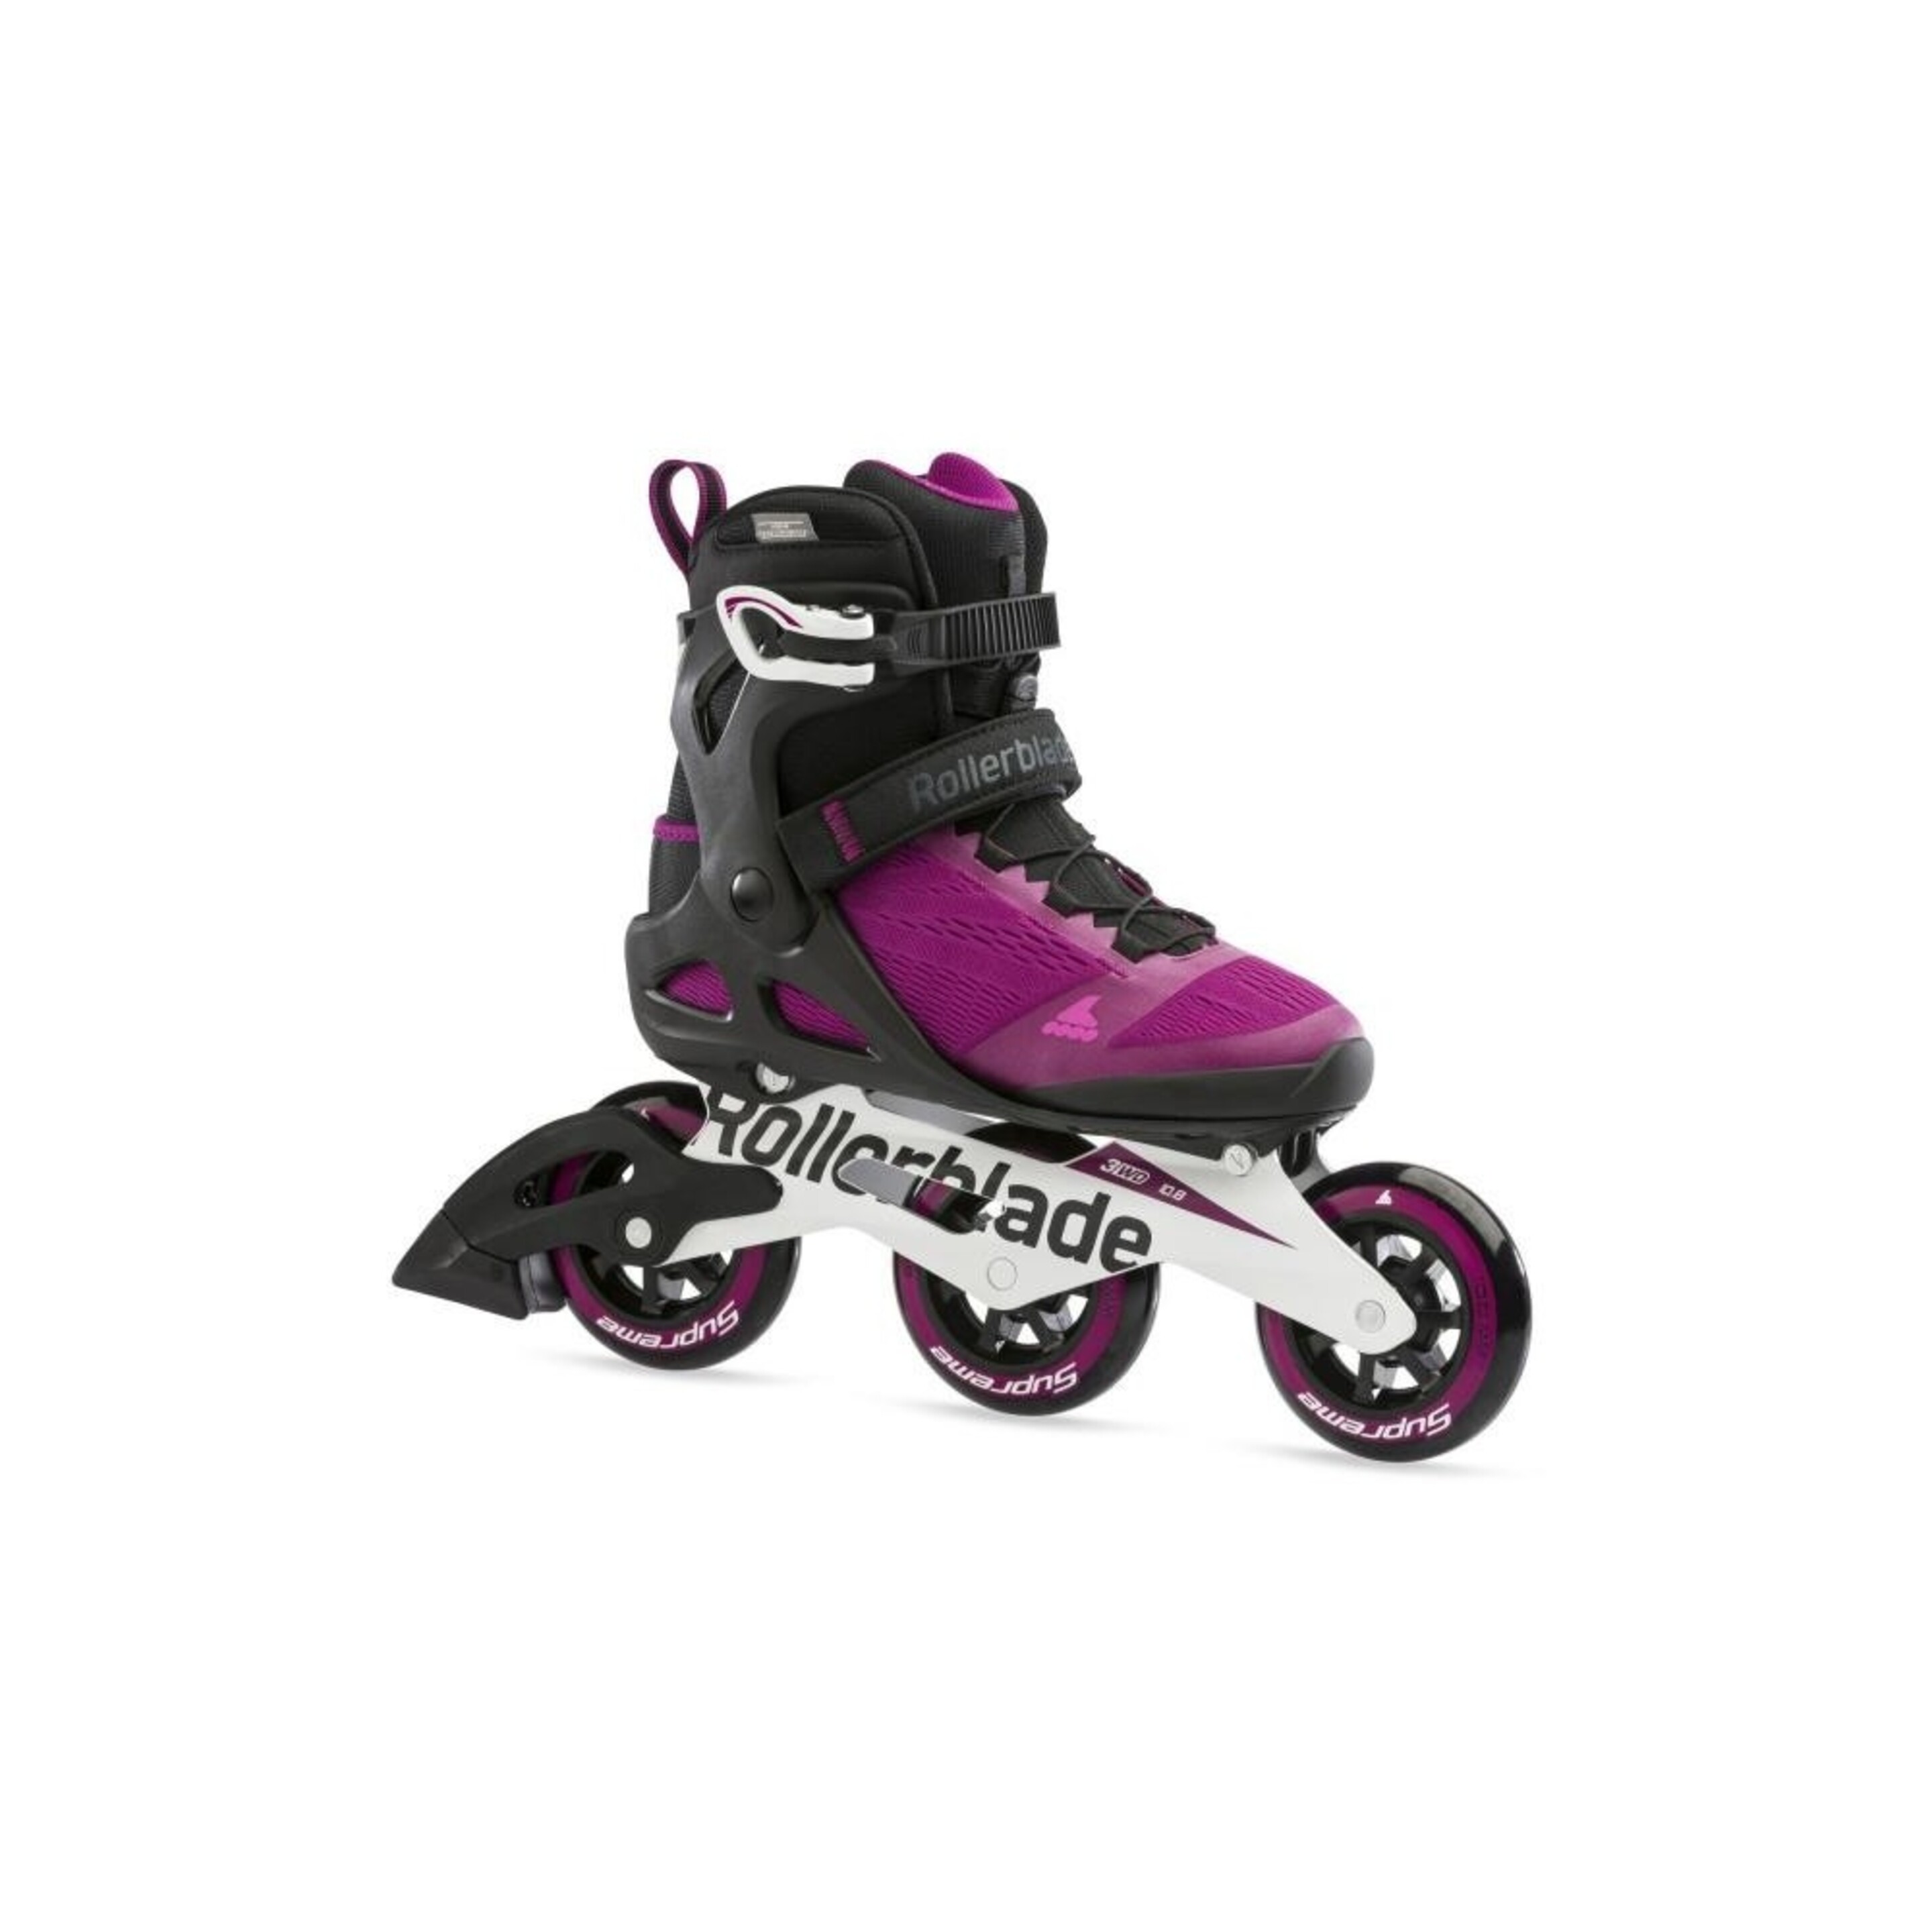 Rollerblade Macroblade 100 3wd W